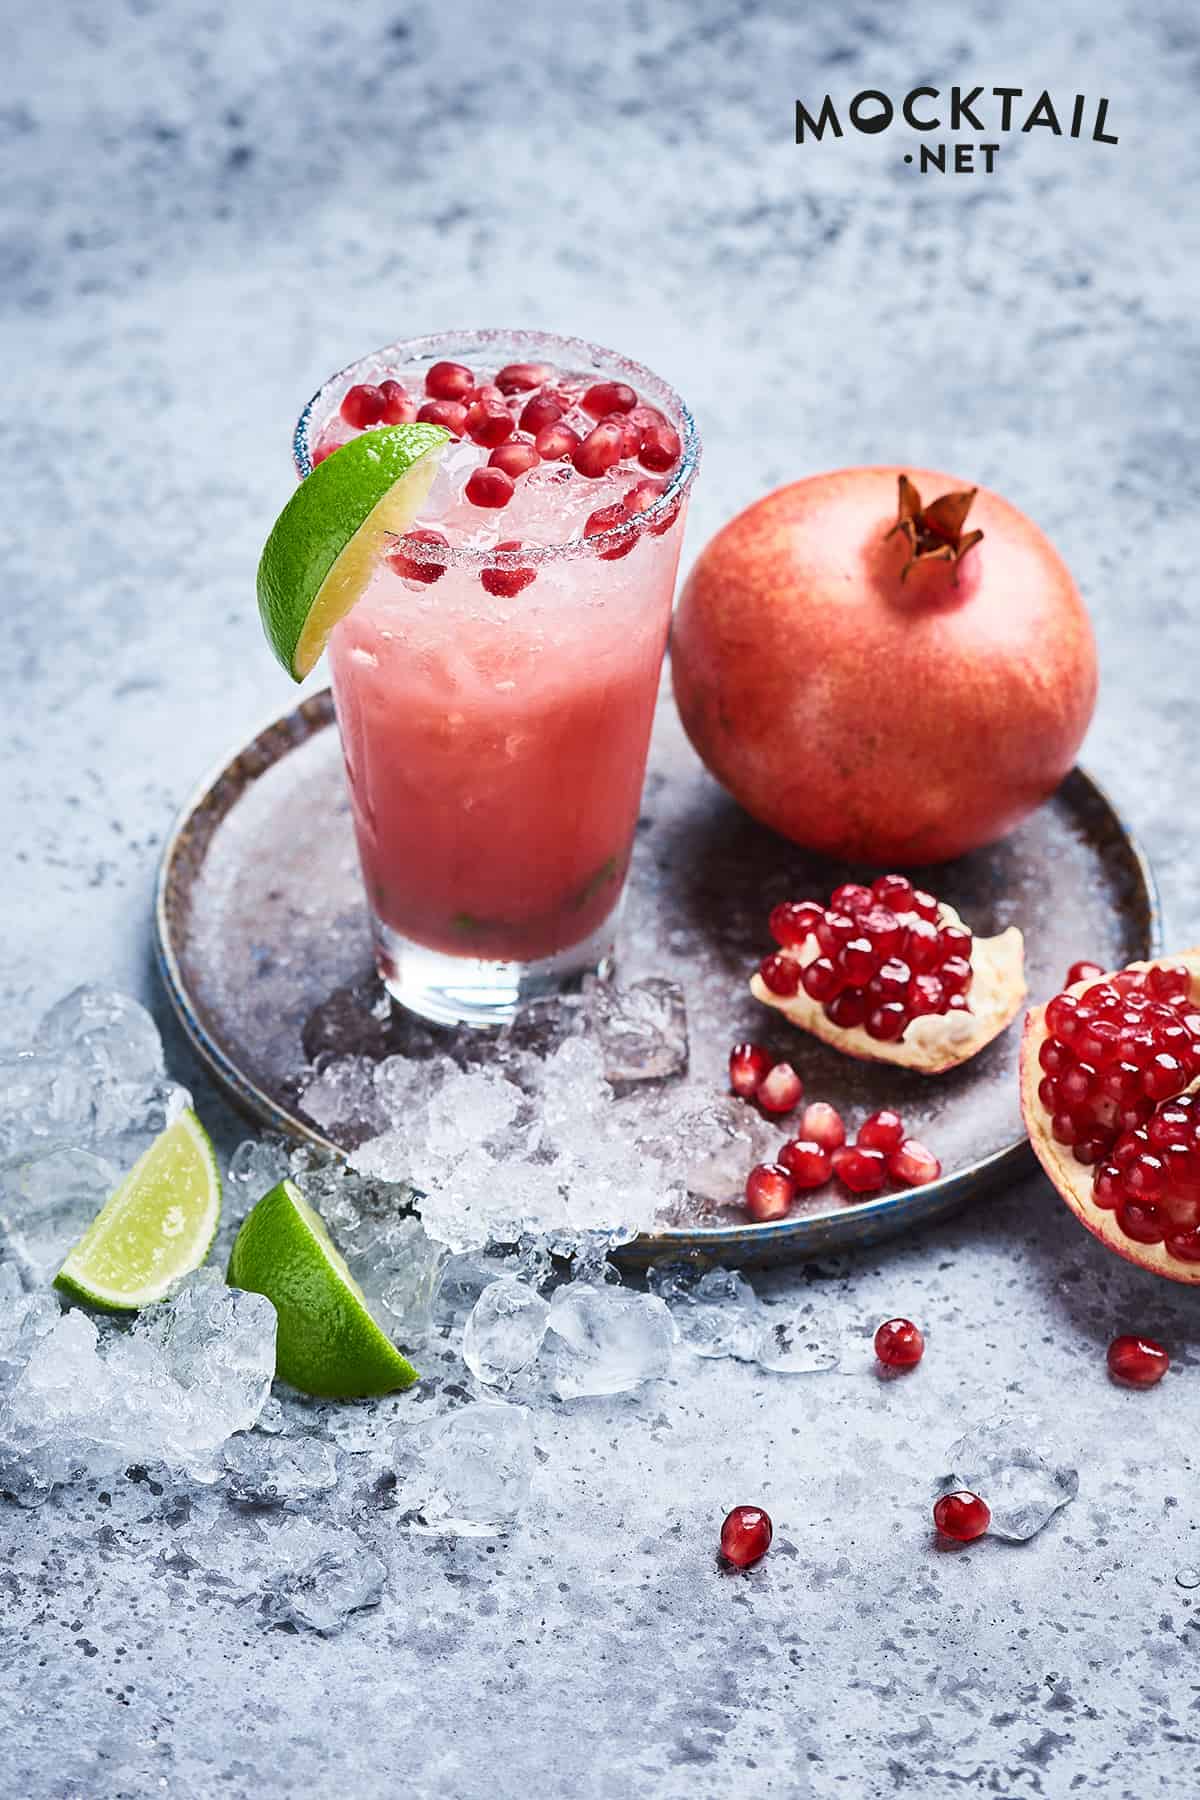 How to Make a Pomegranate Mocktail